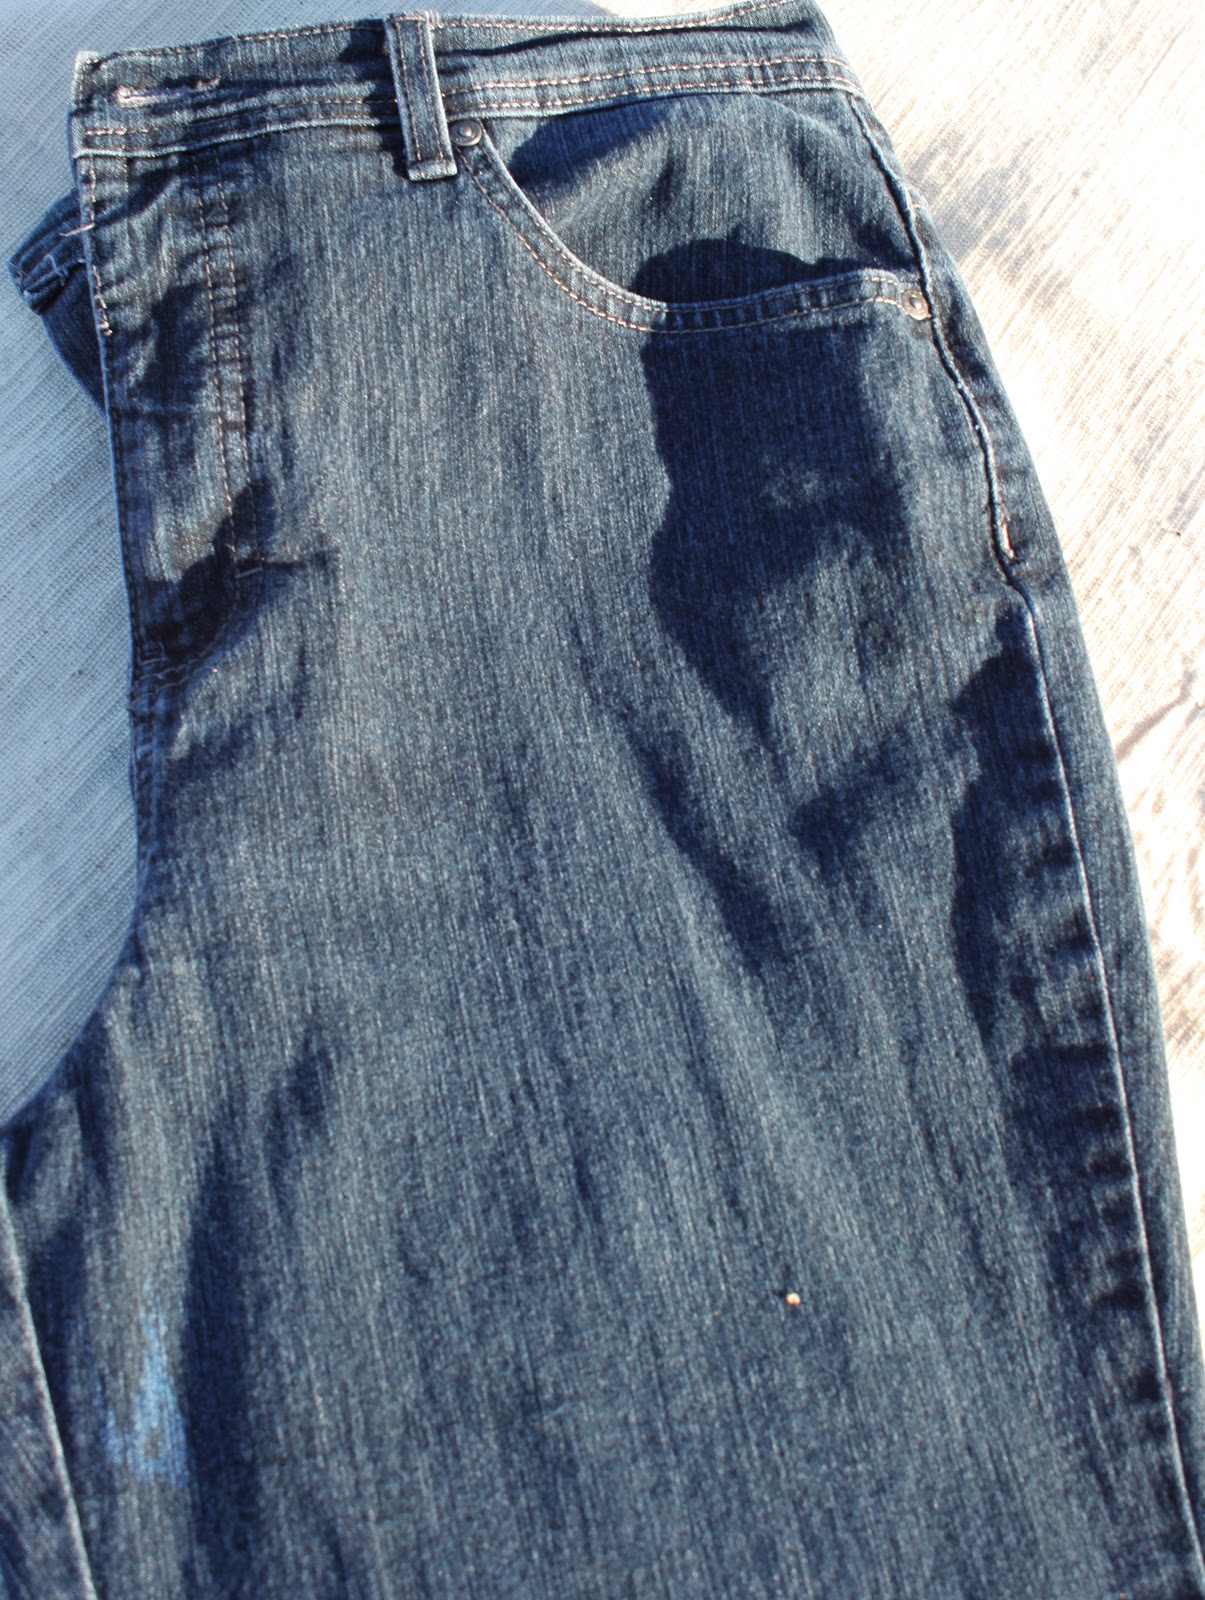 Lollyquiltz: Remaking Cast-off Jeans